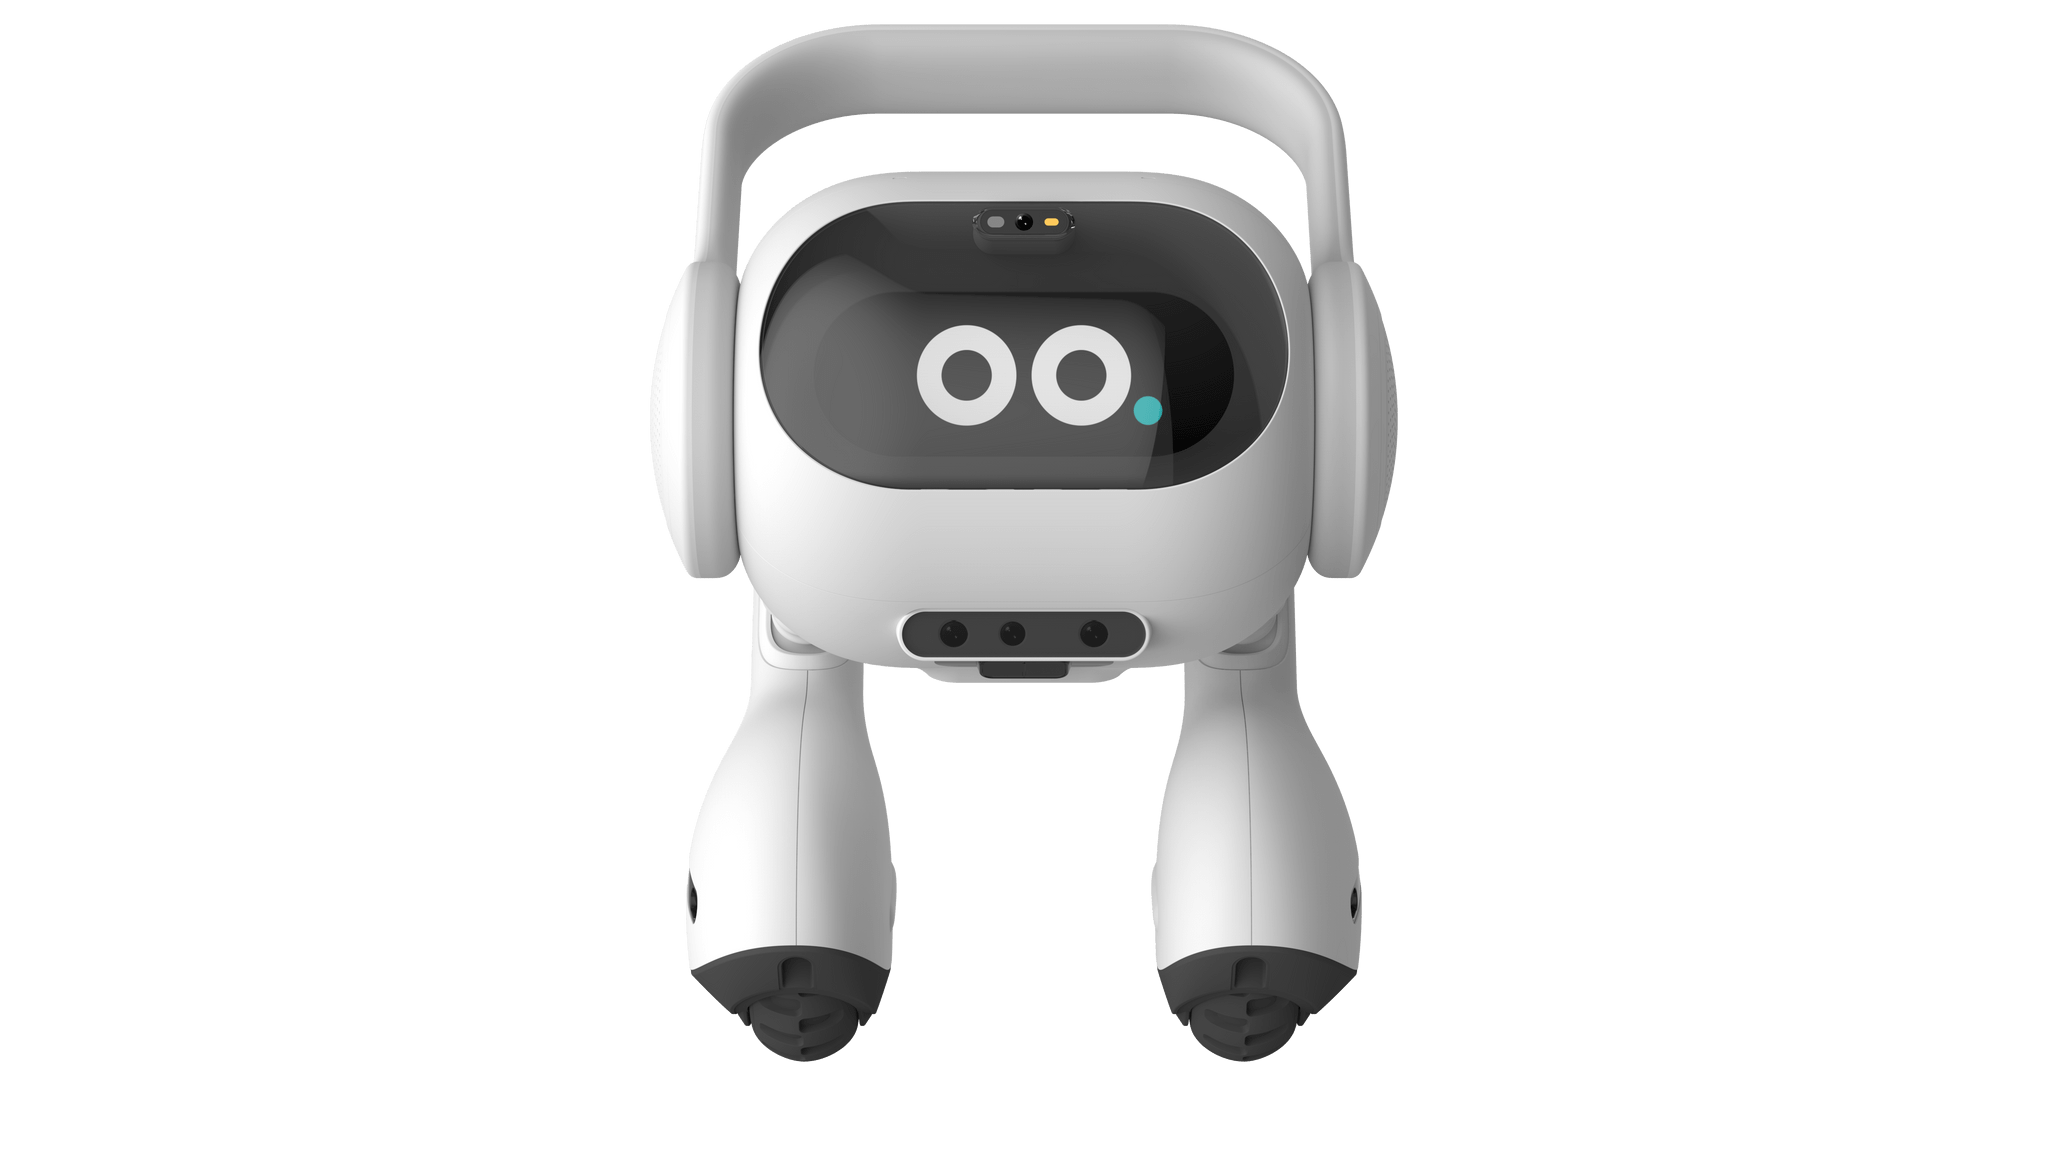 Hot Take: LG's robot is cuter than Samsung's. Source: LG.